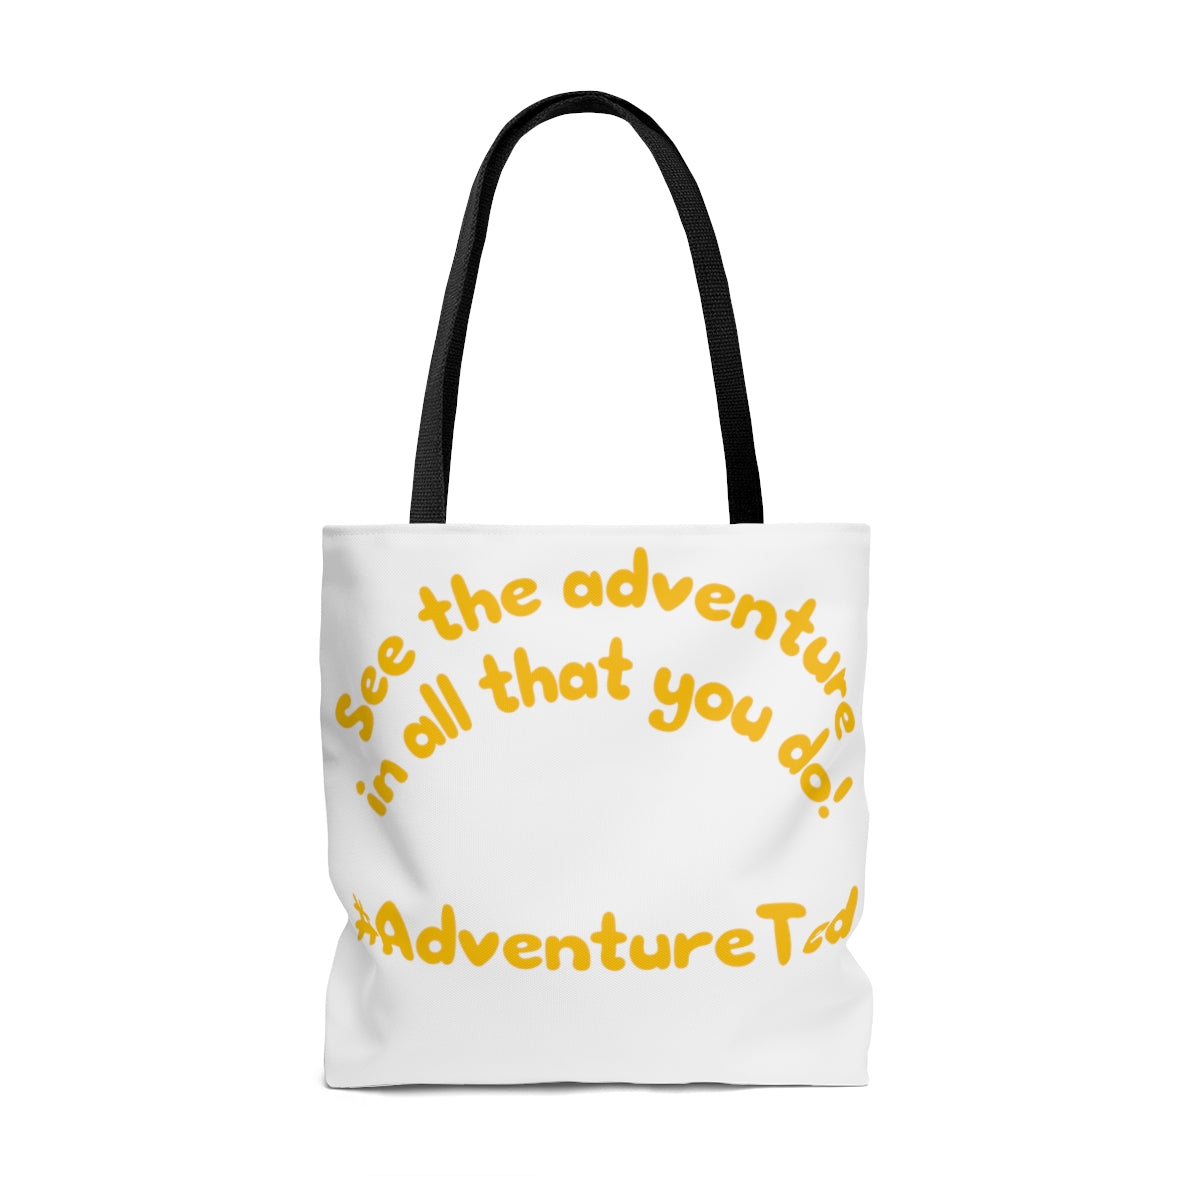 Adventure Ted Canvas Bag - White